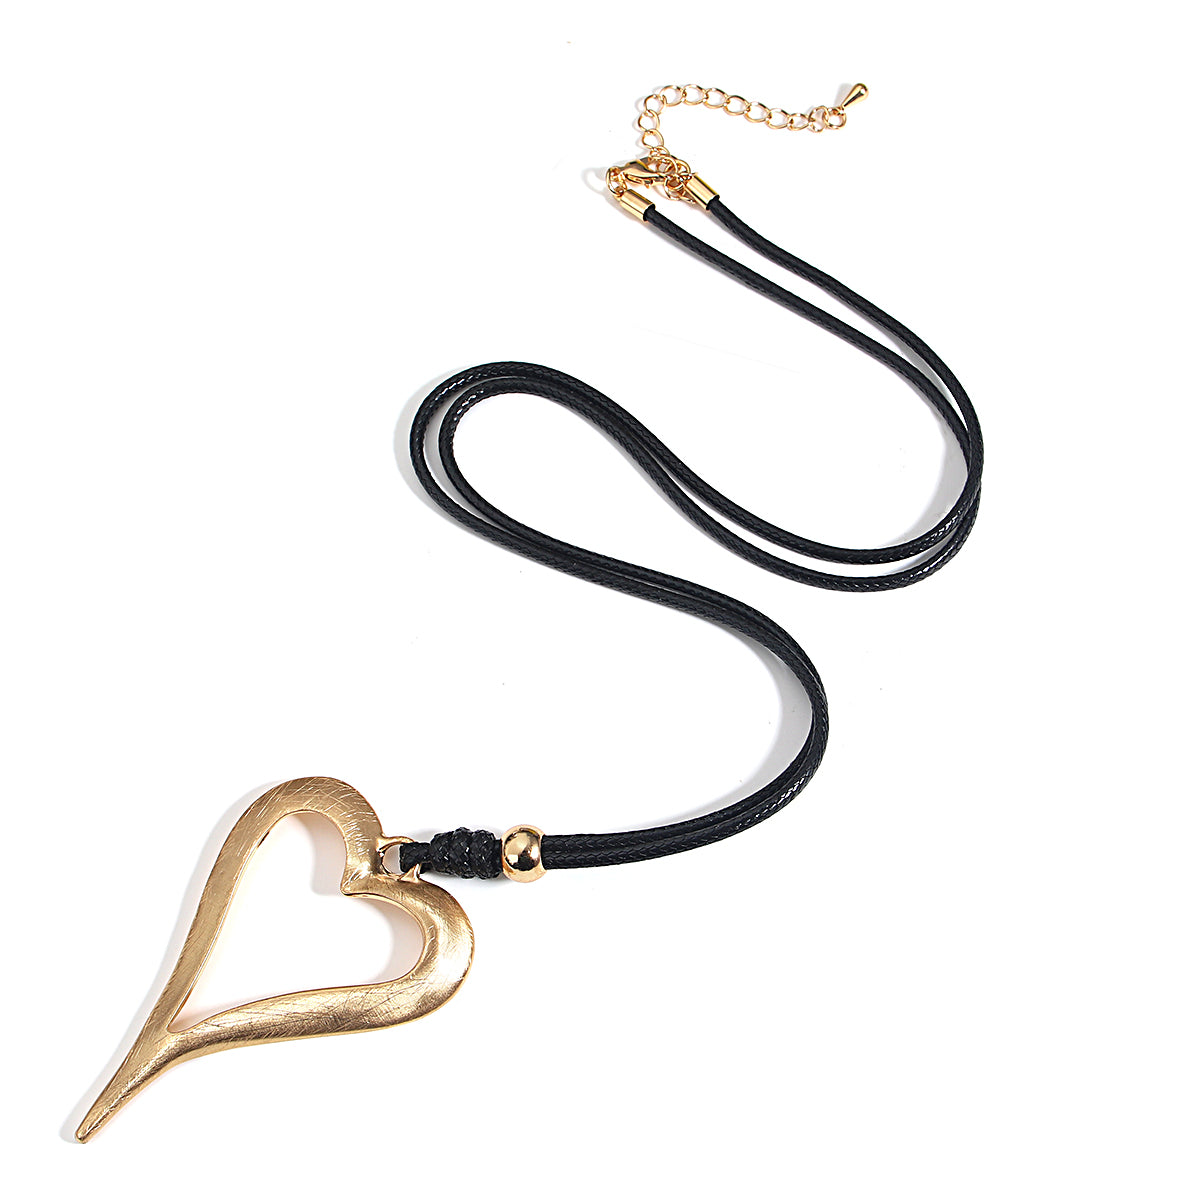 Golden Heart Leather Cord Statement Necklace